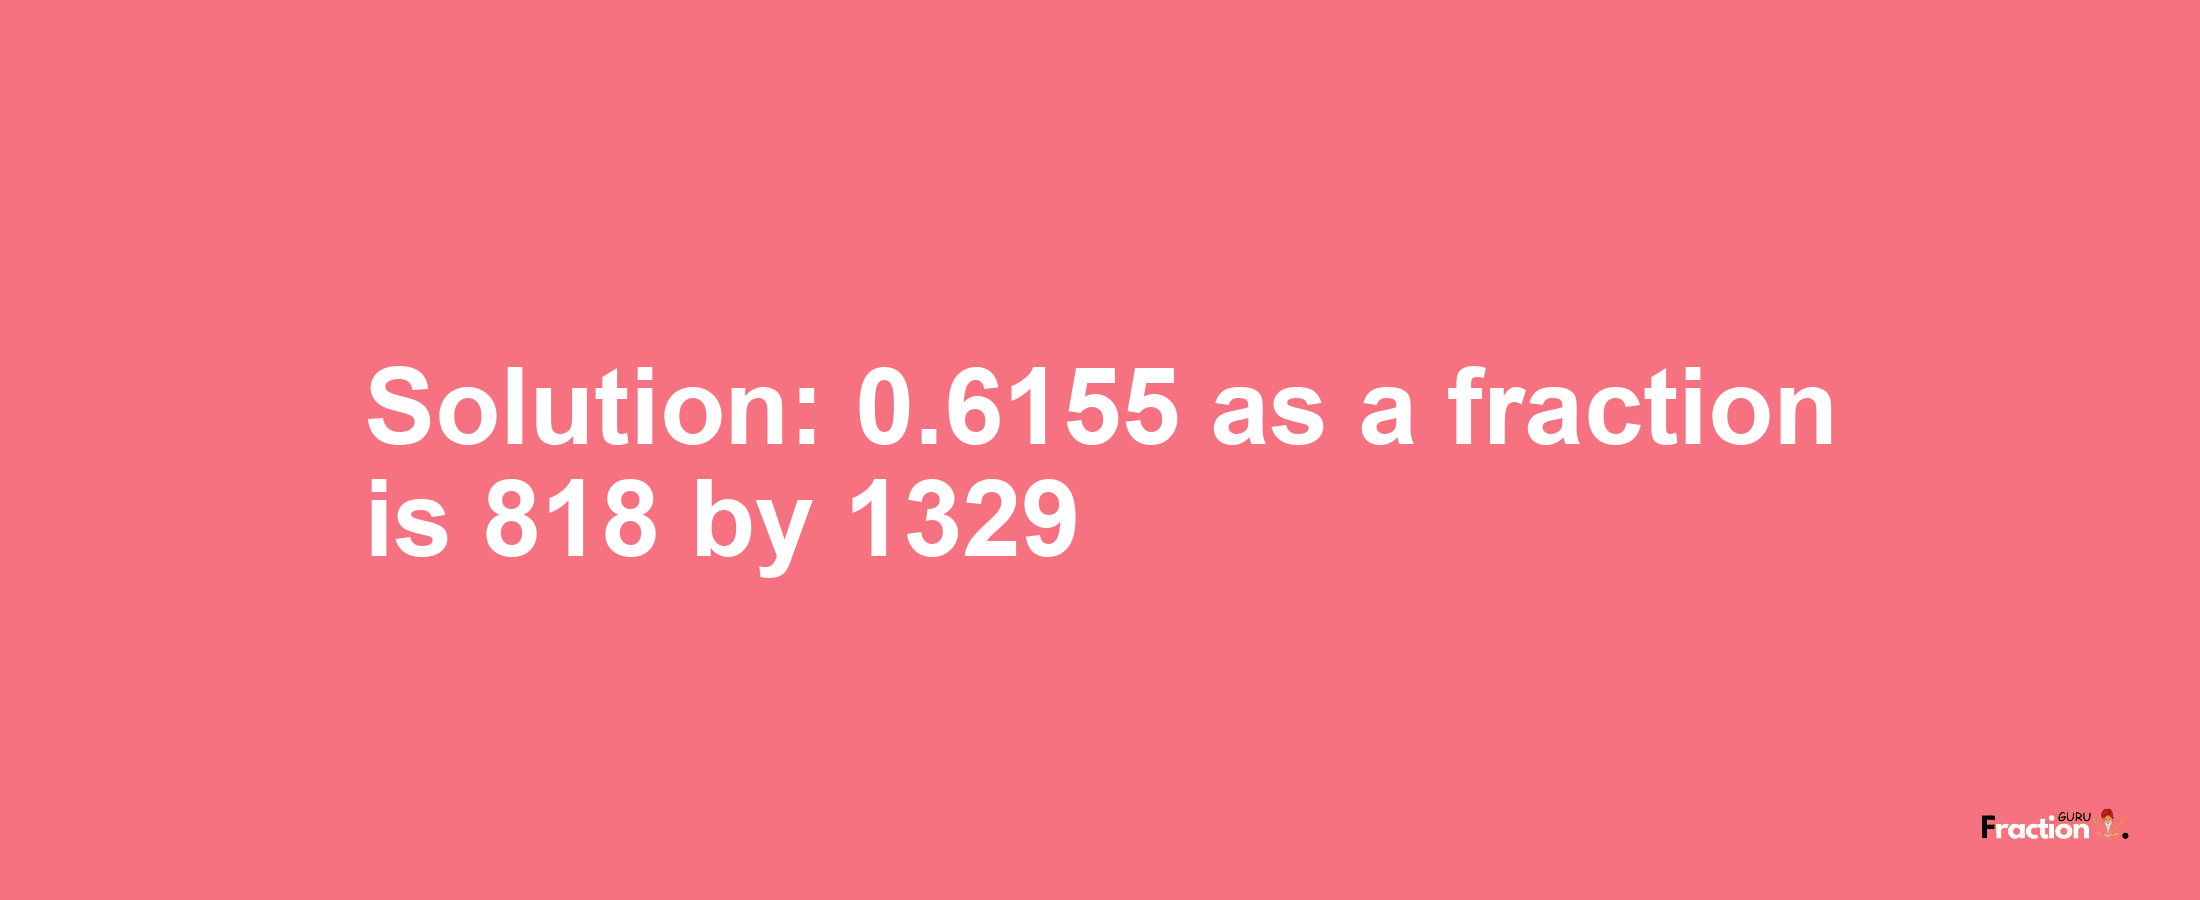 Solution:0.6155 as a fraction is 818/1329